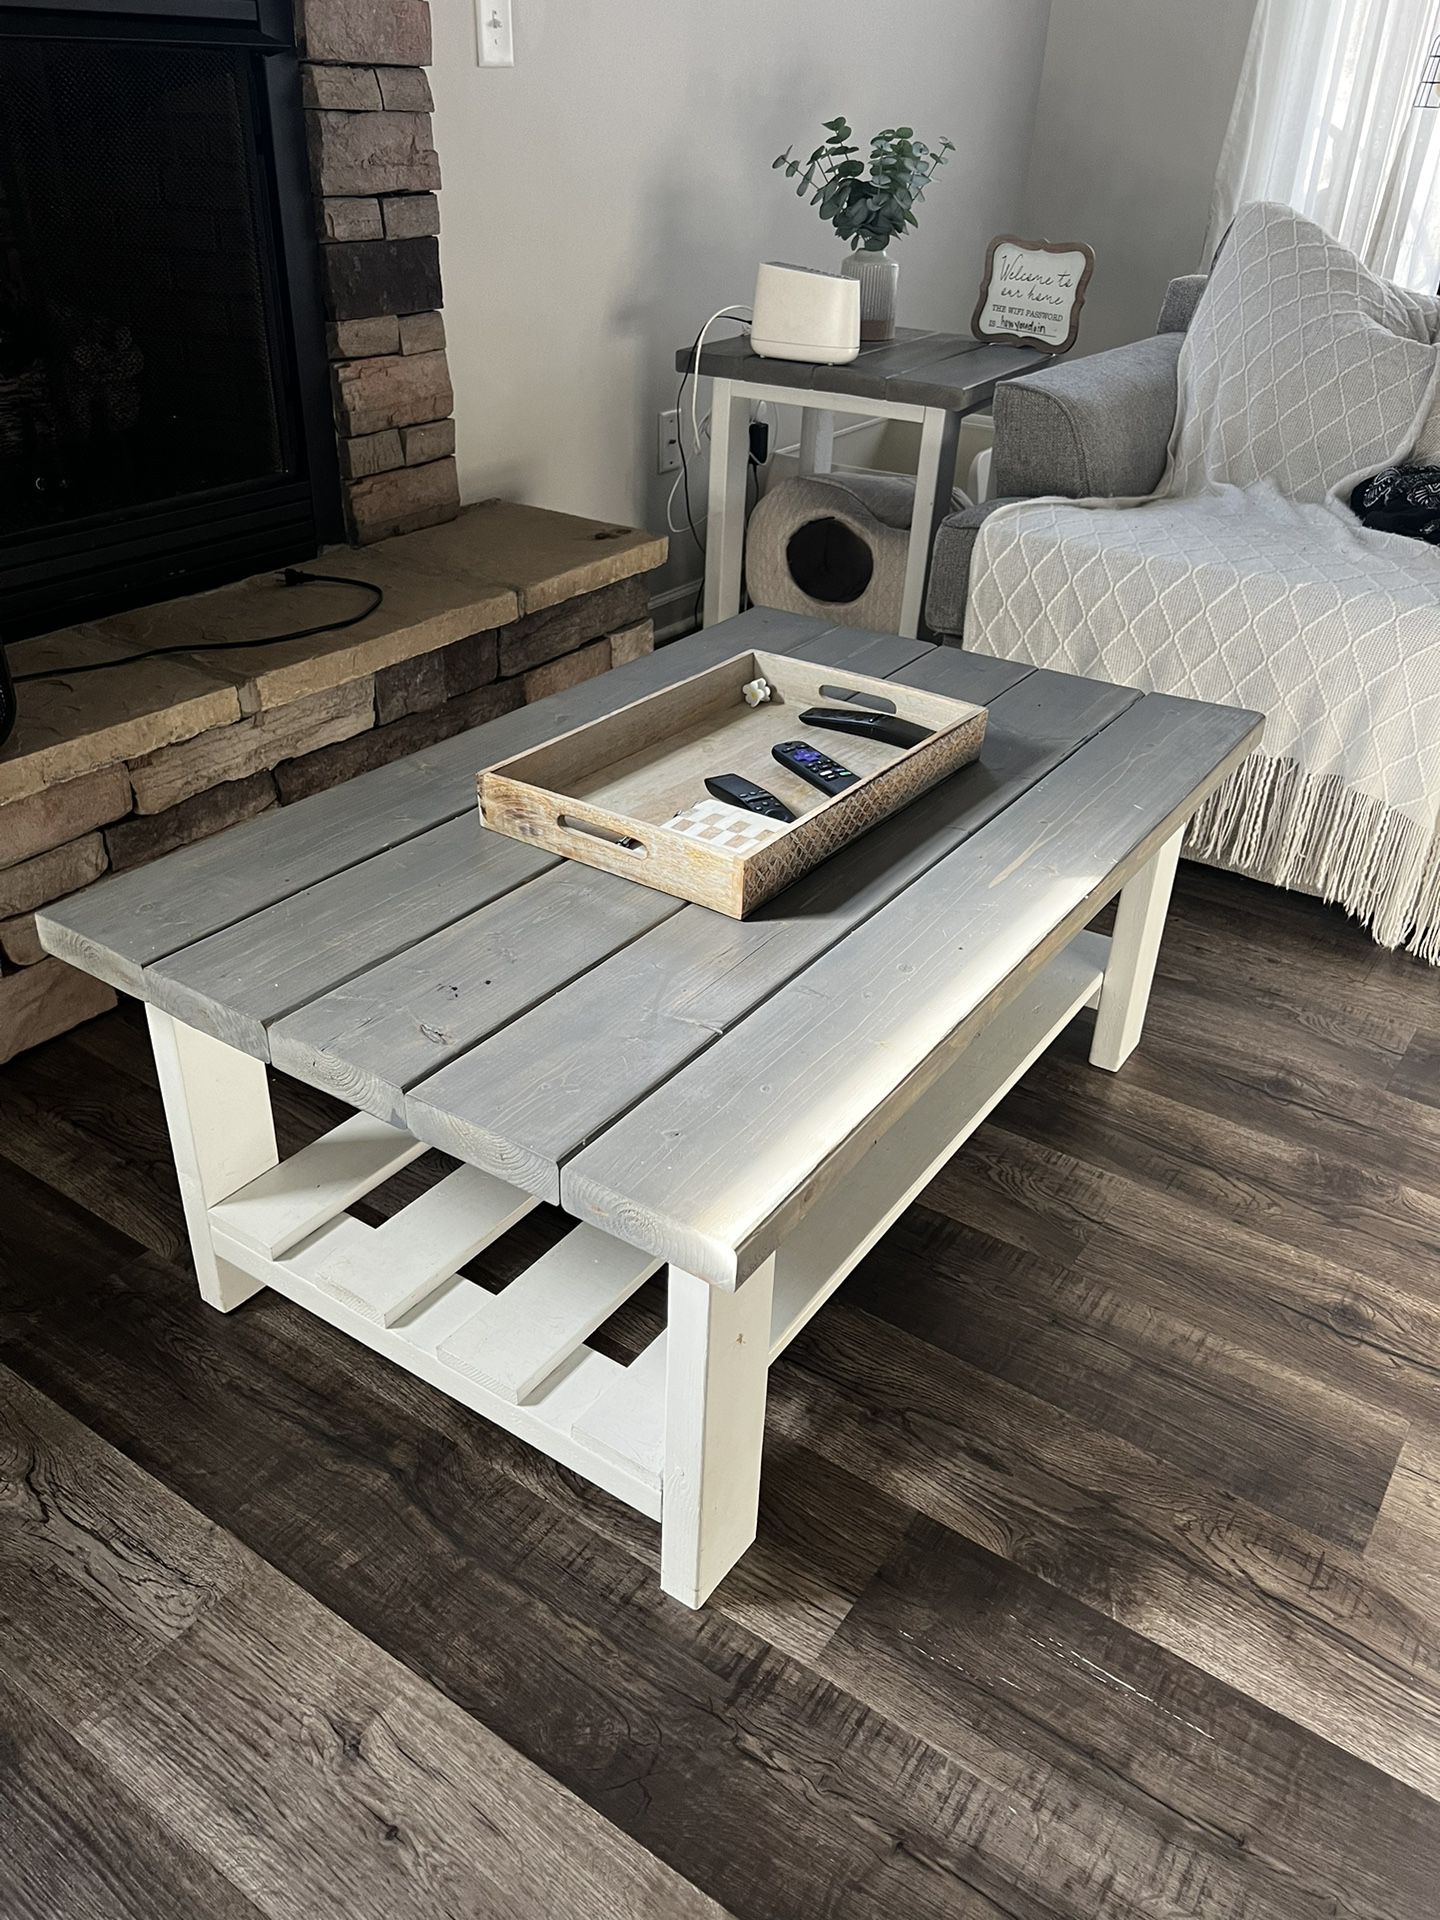 handmade end tables, entry table and coffee table